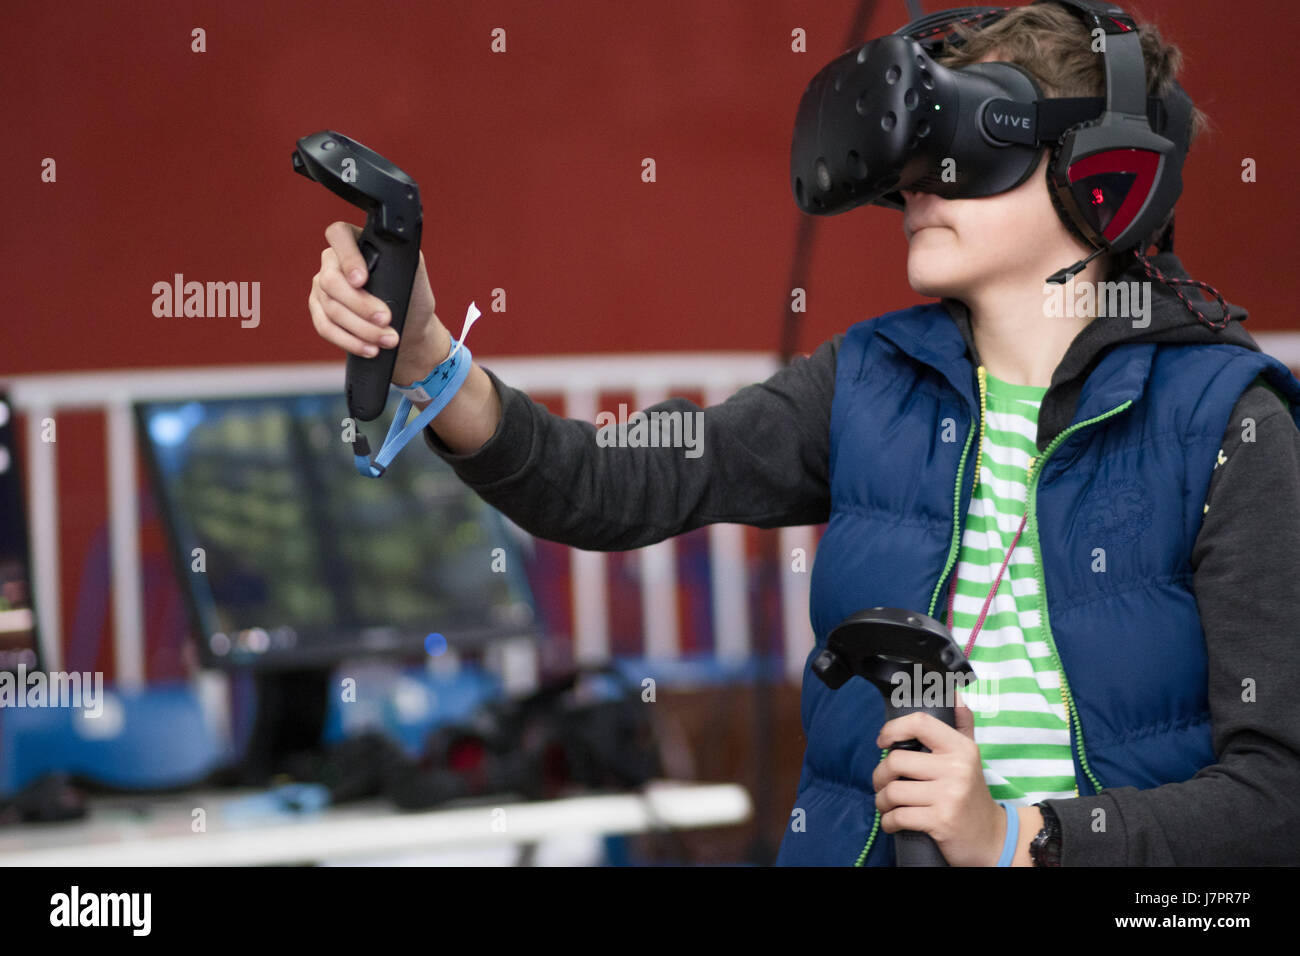 SEINT-PETERSBURG, RUSSIA - MAY 20, 2017: Boy tests the glasses of virtual reality at the exhibition of computer games, virtual reality exposition in Saint Petersburg, Russia Stock Photo